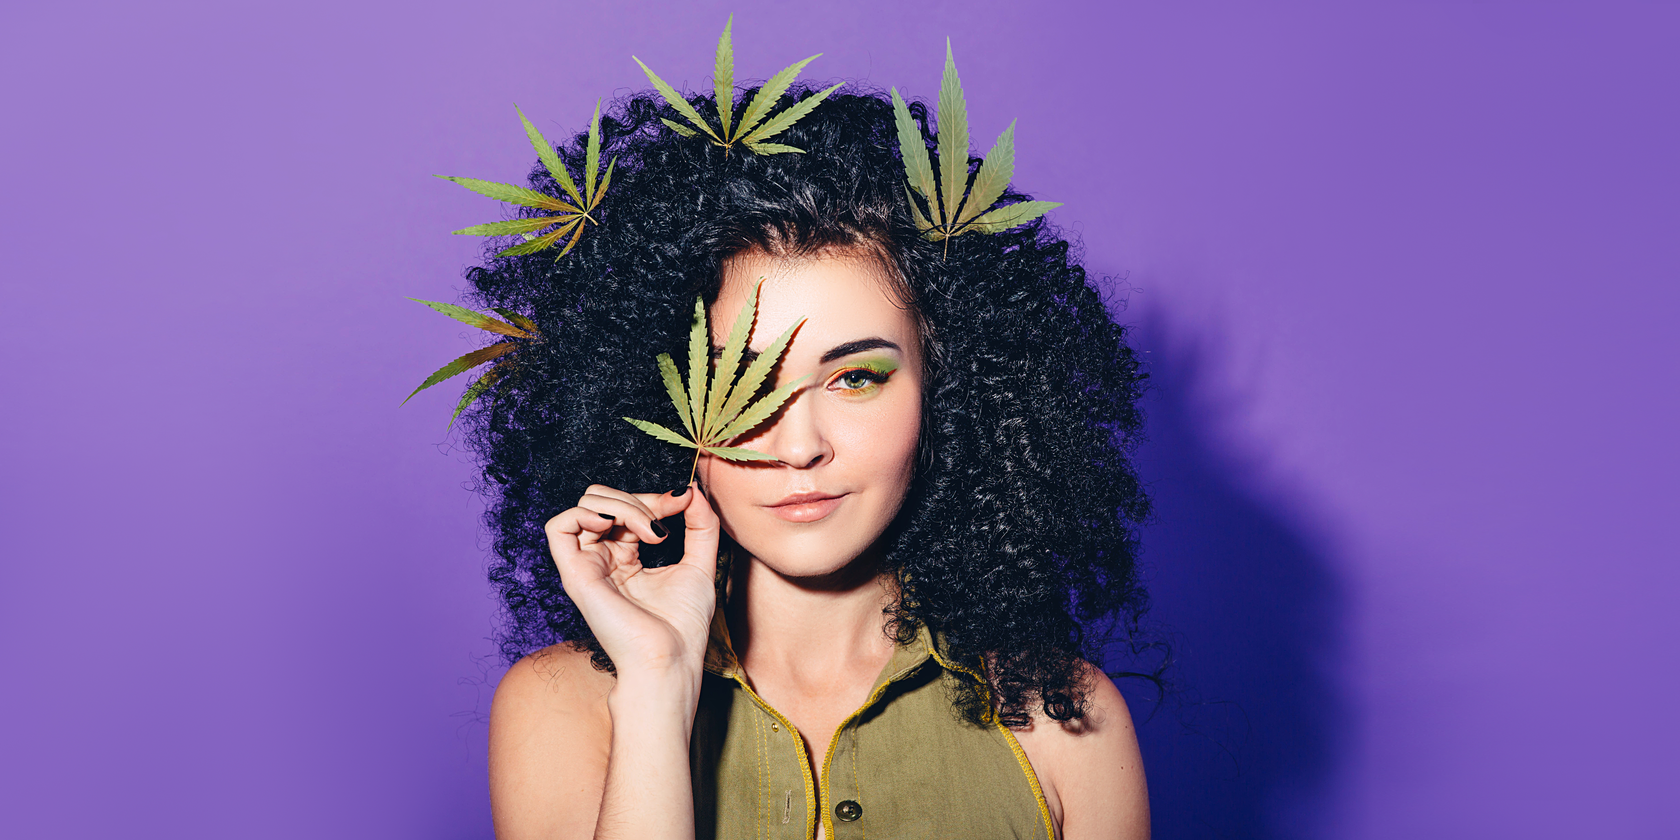 Woman with cannabis leaves in her Black Curly hair and holding up a cannabis leaf to her face